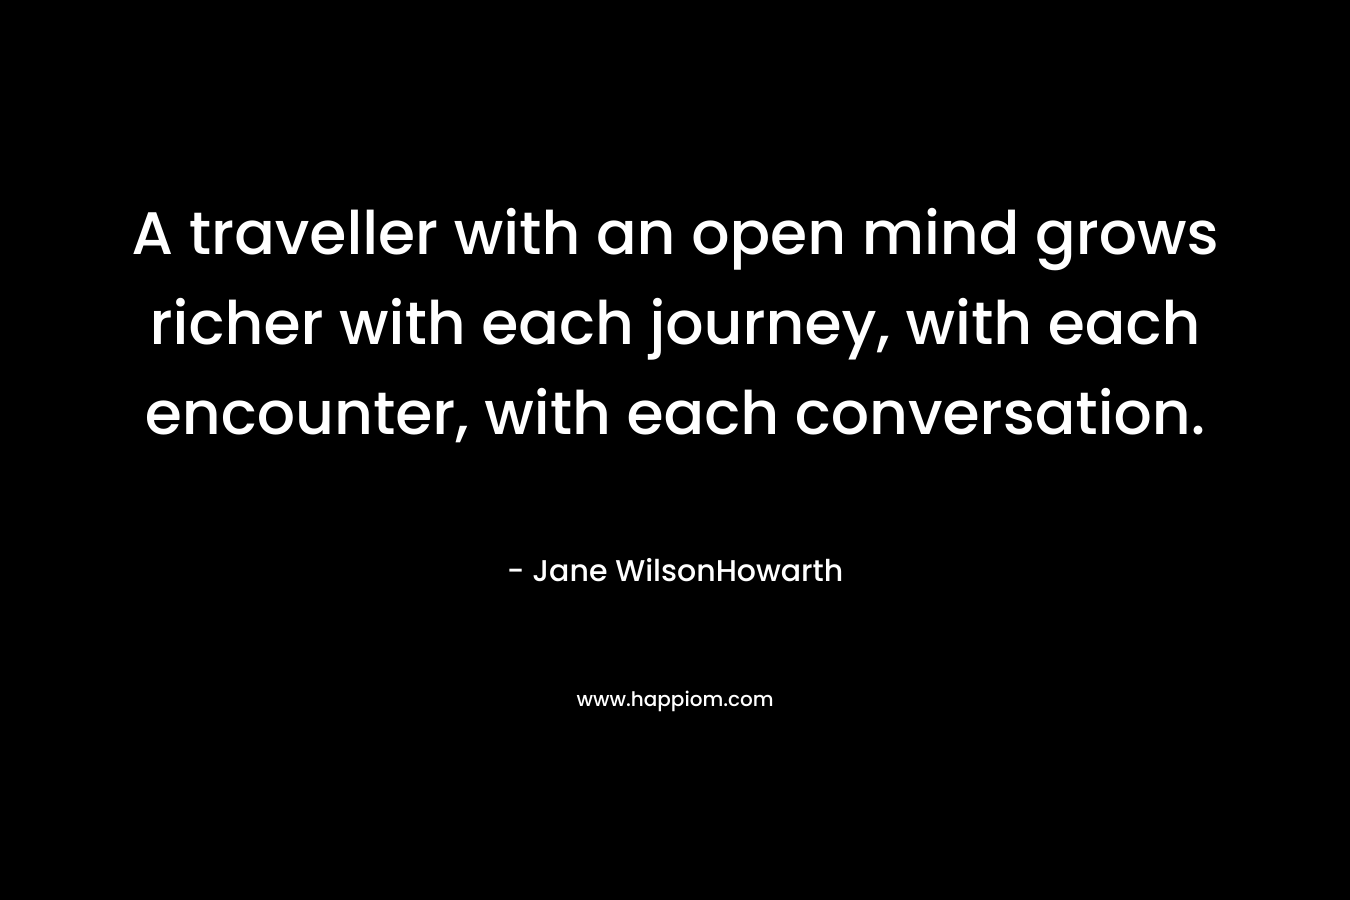 A traveller with an open mind grows richer with each journey, with each encounter, with each conversation.